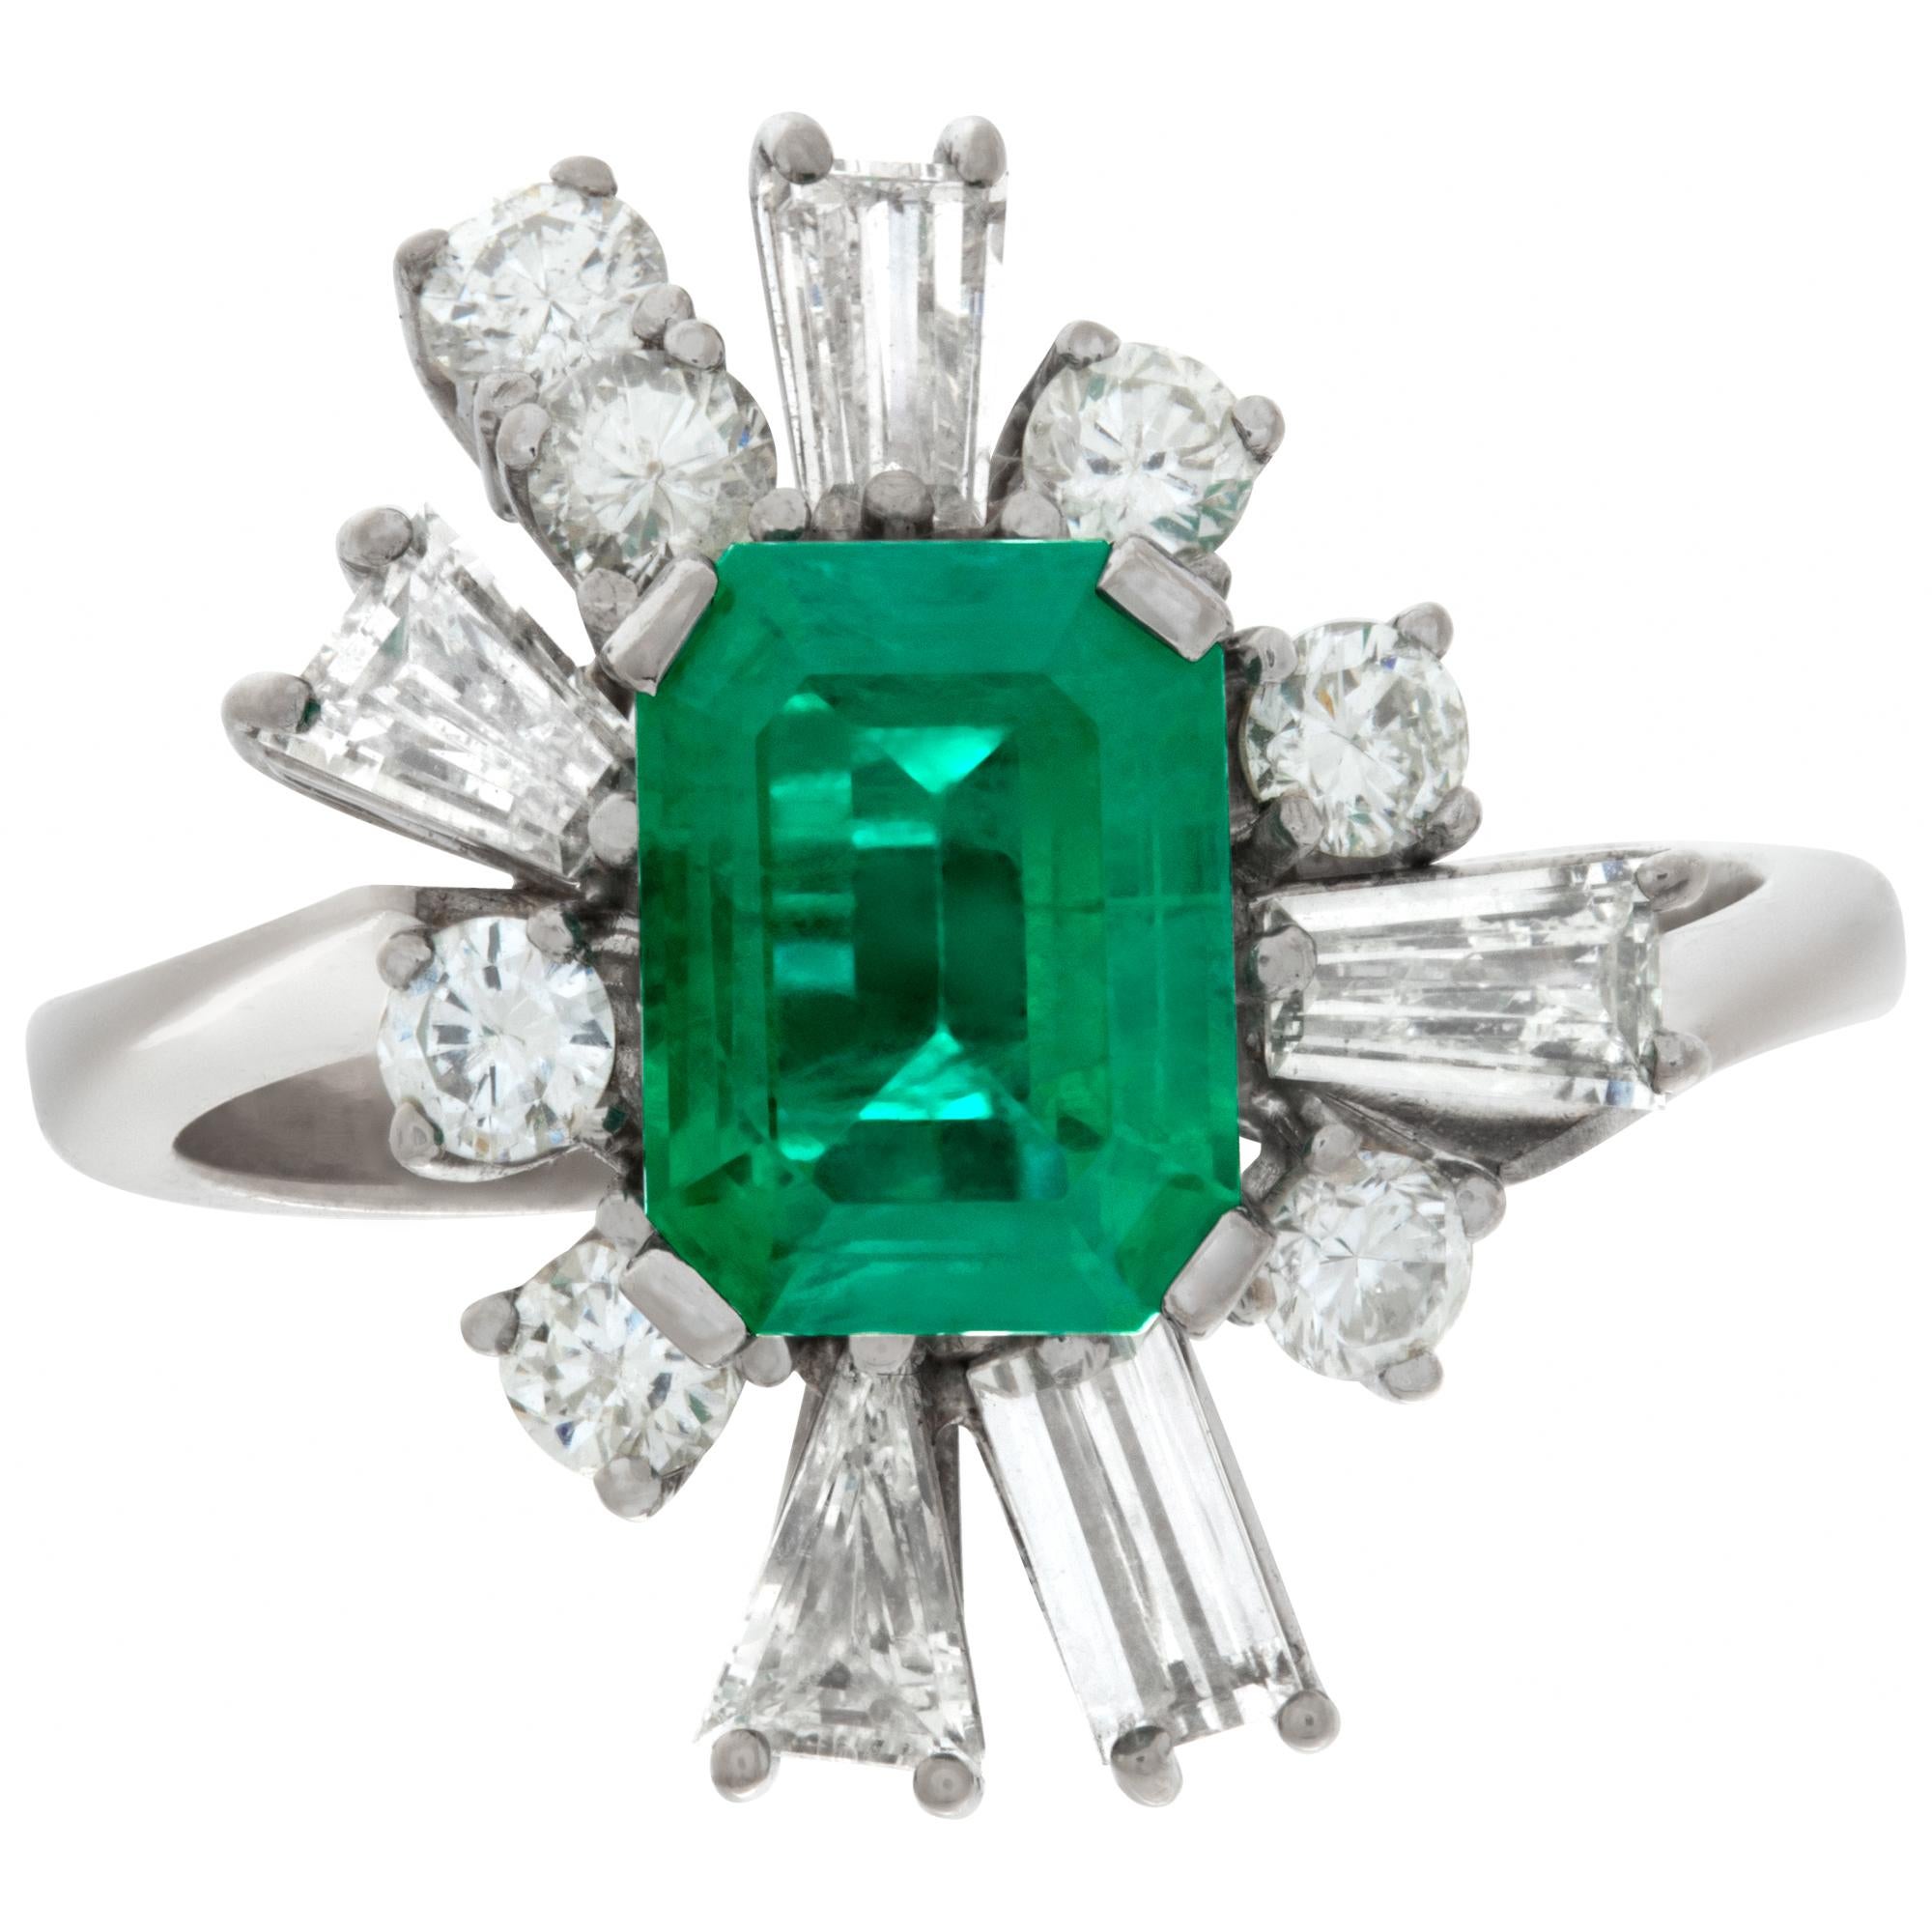 Lovely emerald and diamond cocktail ring in 14k white gold with approximately 1.25 caratt emerald and approximately 1 carat in round and baguette diamonds. Size 6.75.This Emerald ring is currently size 6.75 and some items can be sized up or down,